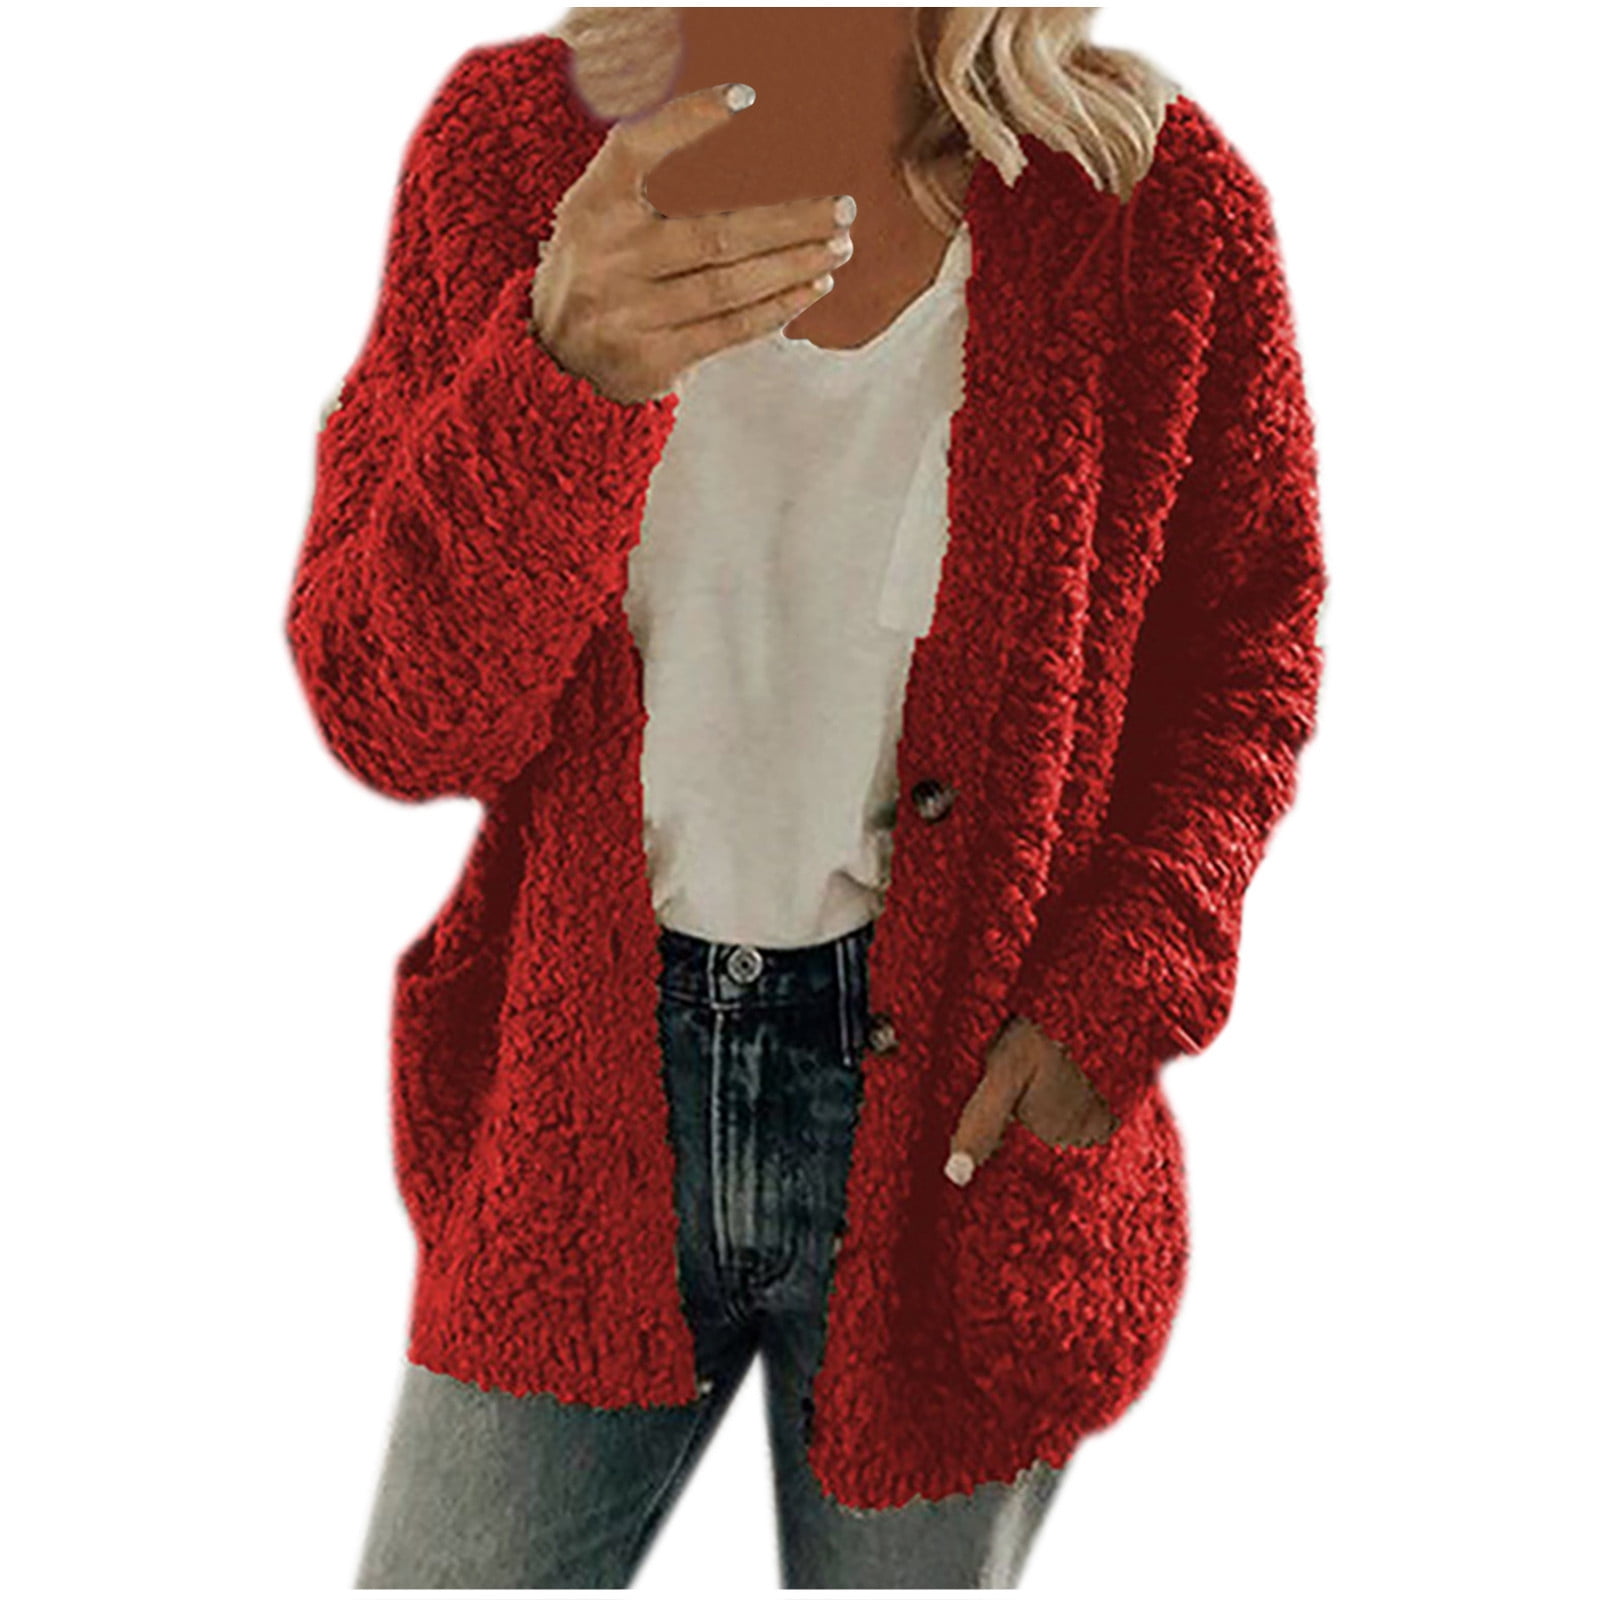 Lolmot Womens Long Sleeve Cardigan Loose Soft Drape Open Front Crochet  Sweater Sun Protection Coverups Casual Lightweight Cadigan with Pockets on  Clearance 